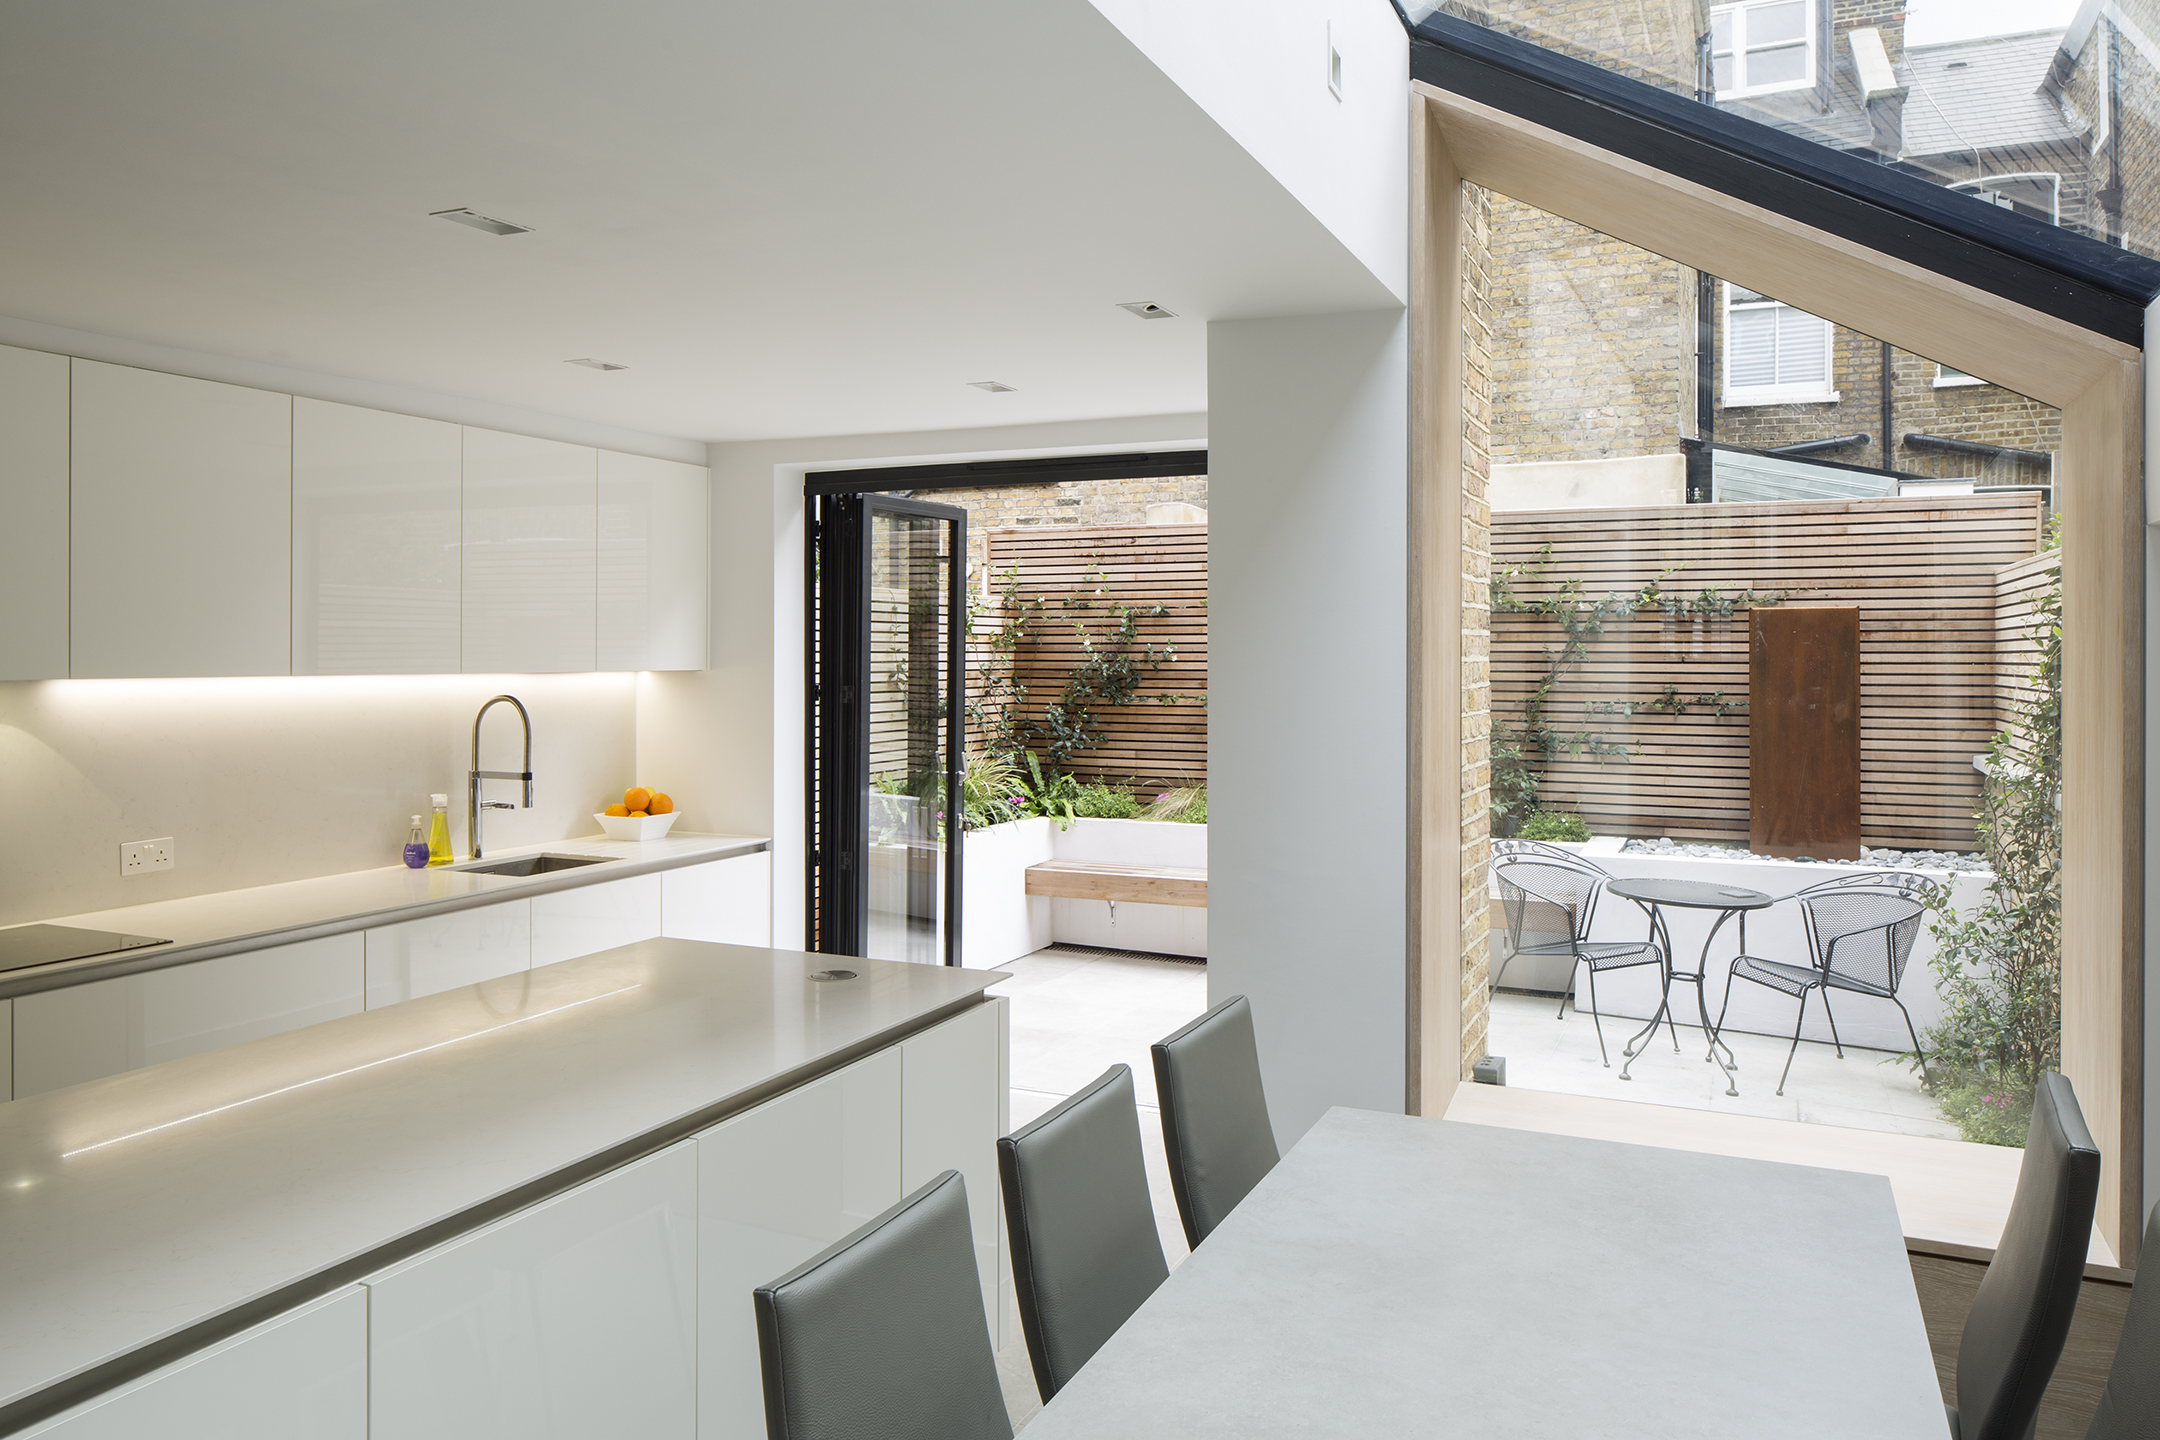 </p> <p>Find your ideal home design pro on designfor-me.com - get matched and see who's interested in your home project. Click image to see more inspiration from our design pros</p> <p>Design by Simon, architect from Southwark, London</p> <p>#architecture #homedesign #modernhomes #homeinspiration #kitchens #kitchendesign #kitcheninspiration #kitchenideas #kitchengoals #sideextensions #sidereturn #sideextensionideas </p> <p>